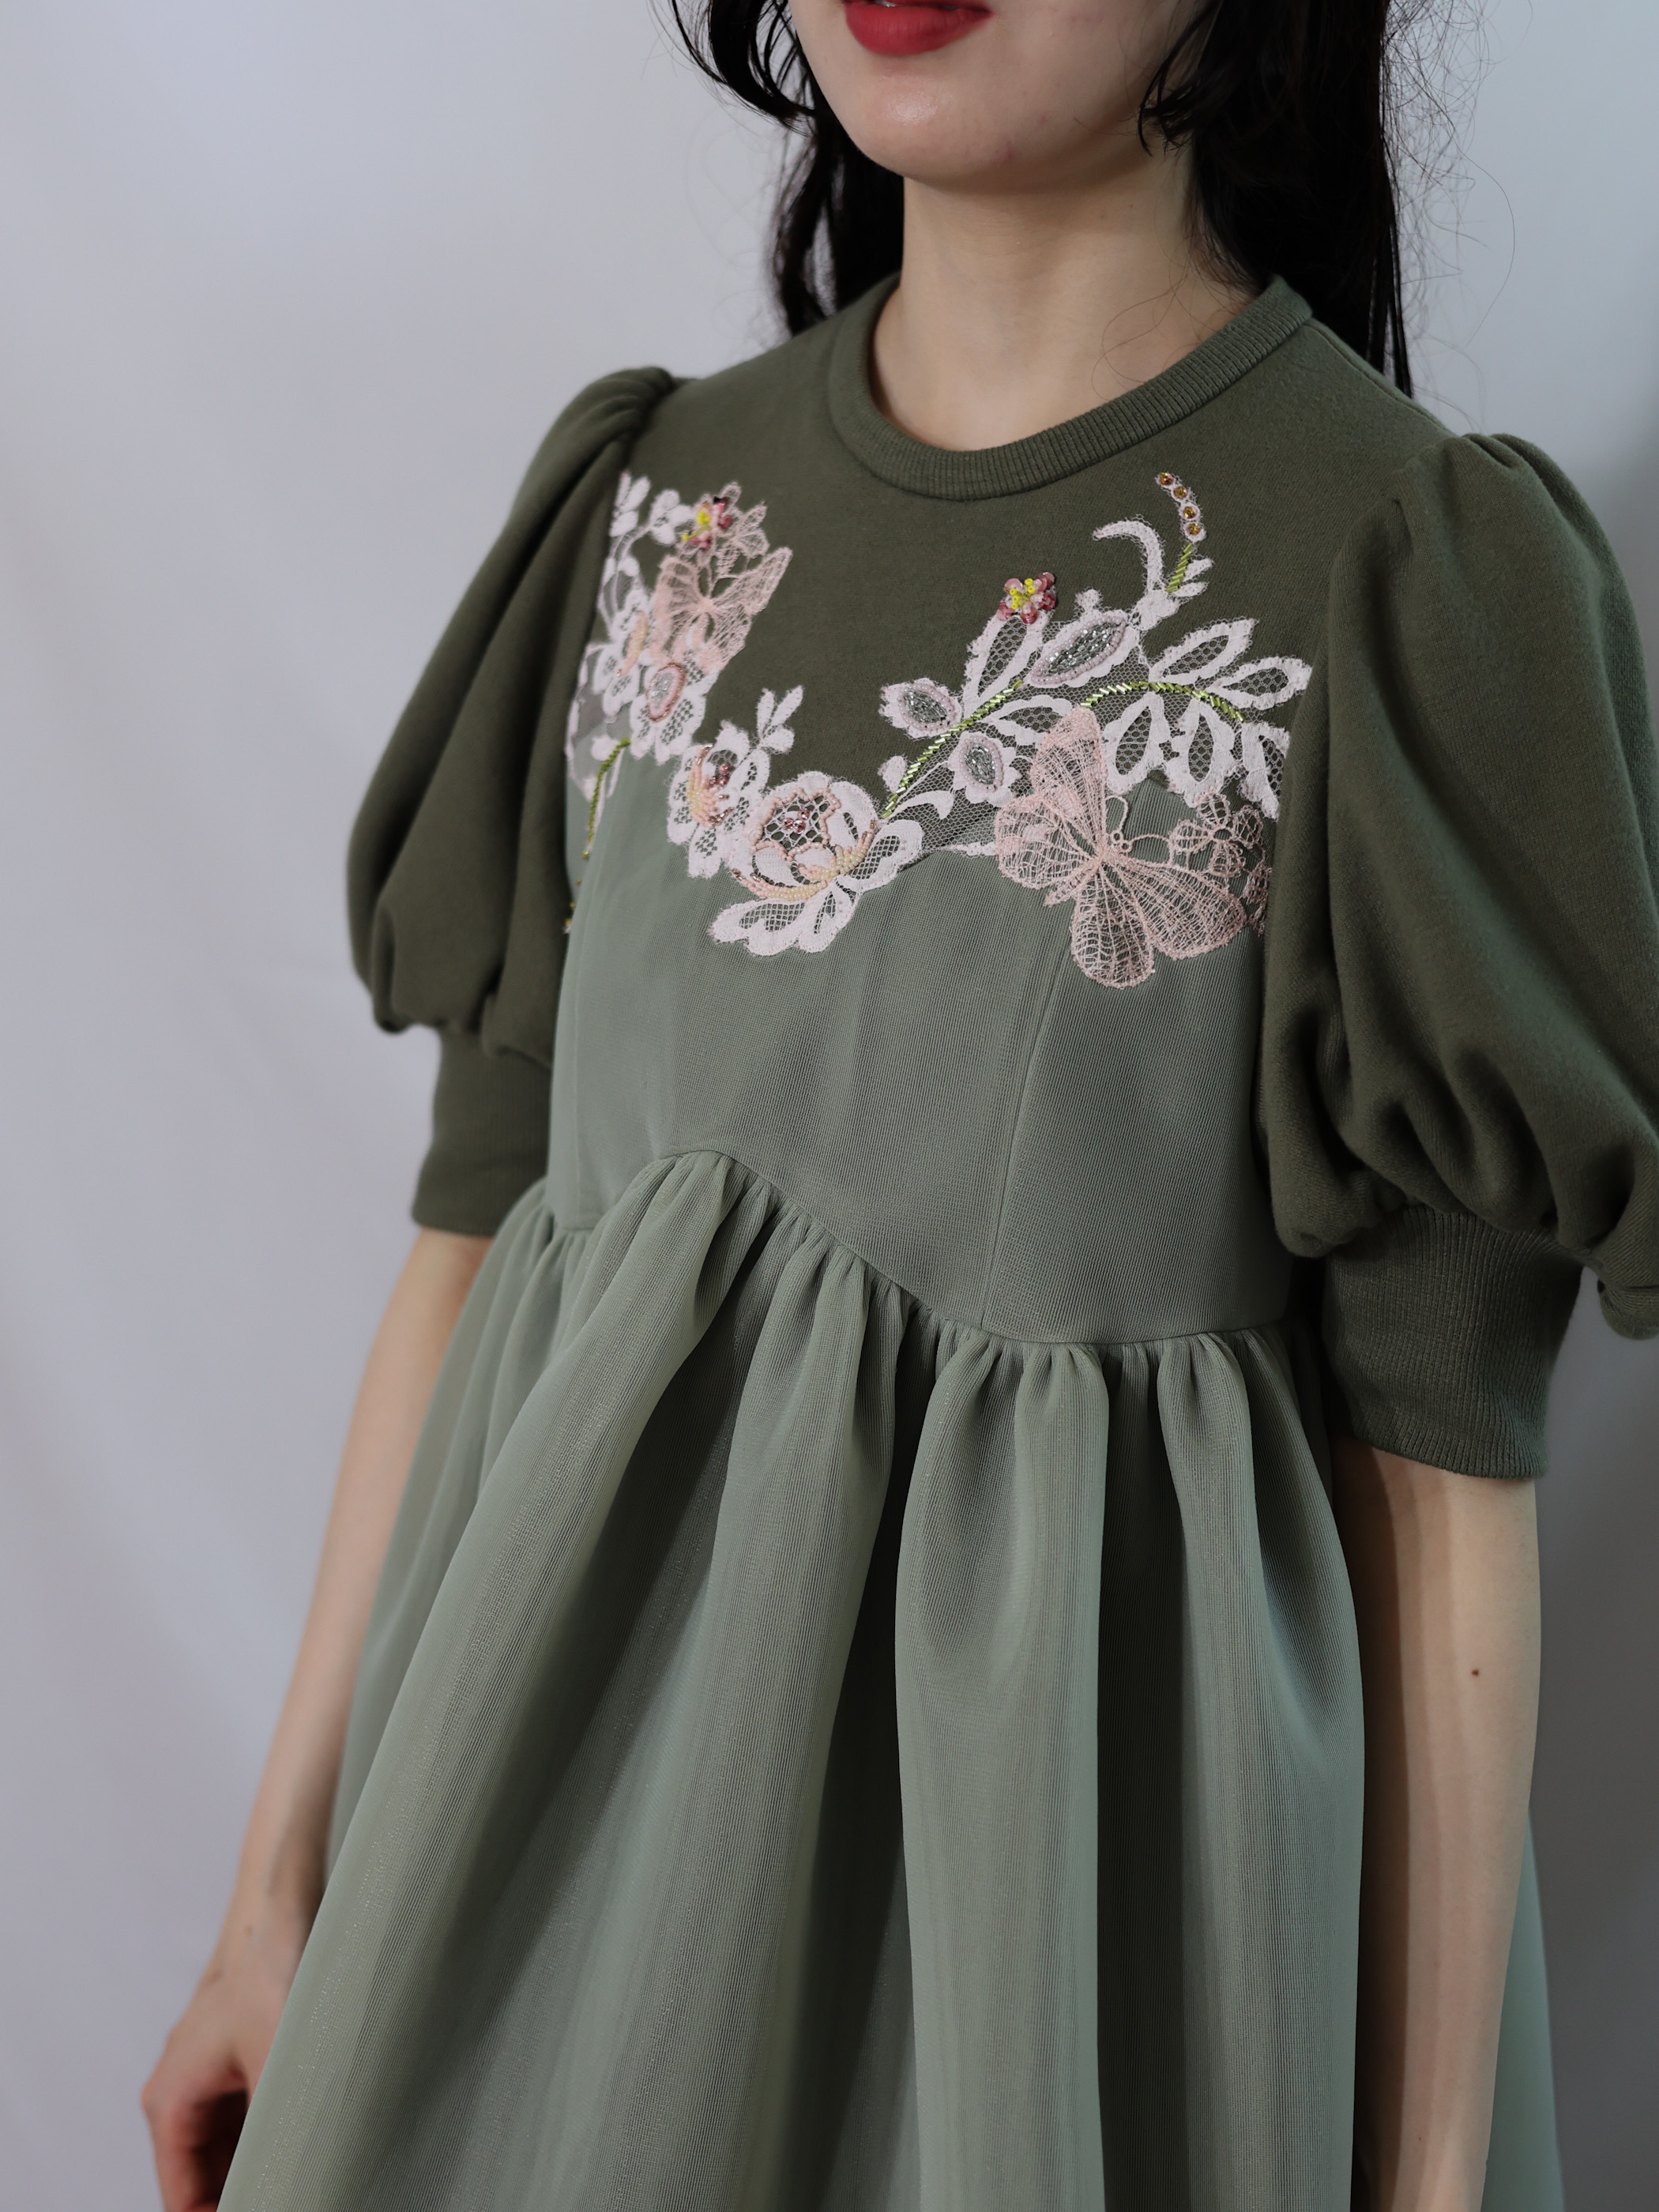 【SOLD】docking bead embroidery dress